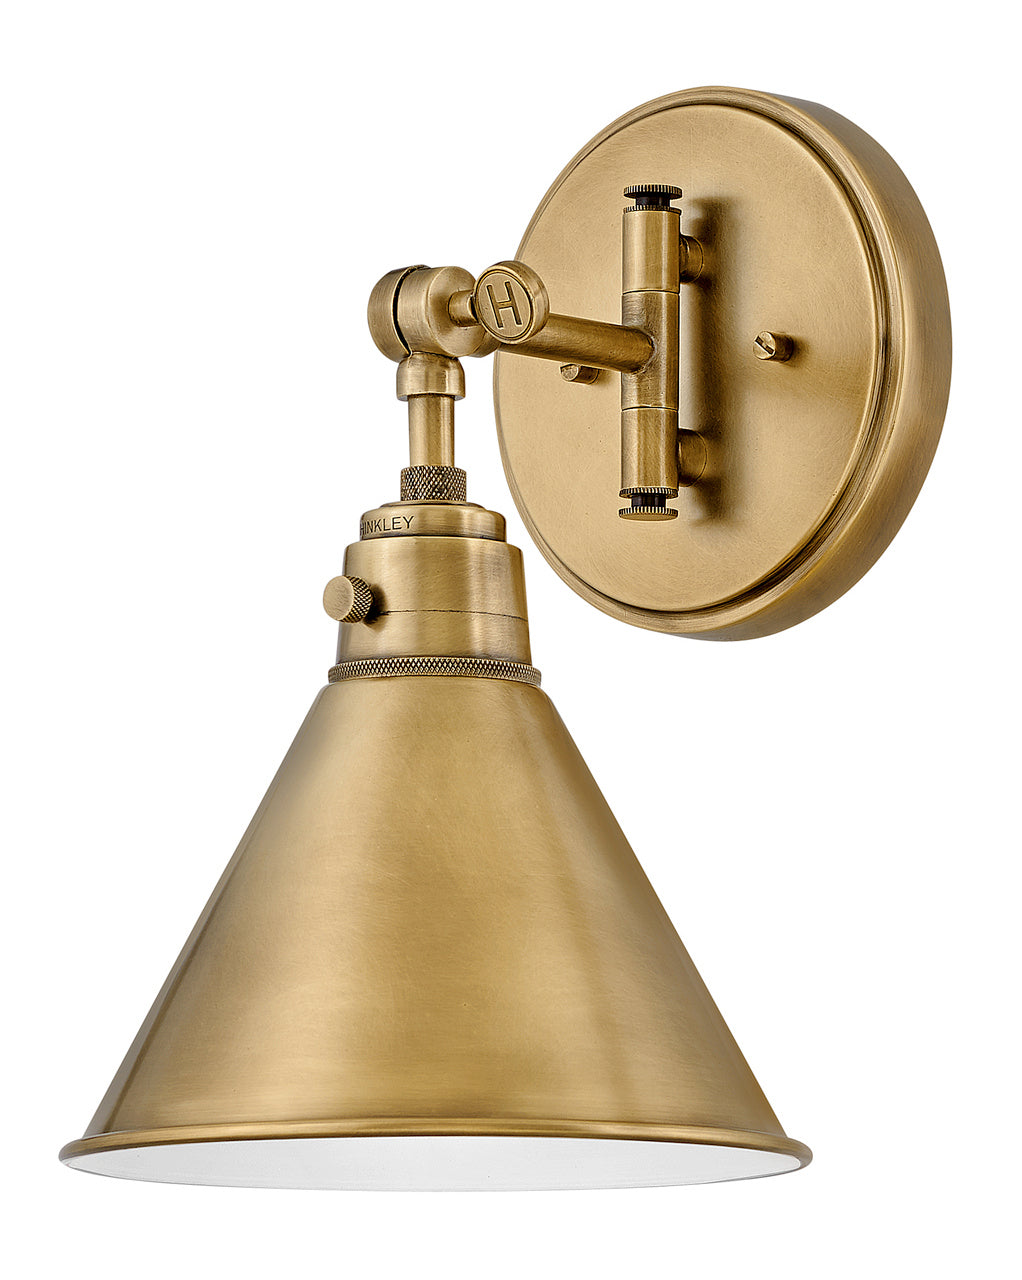 Hinkley - 3691HB - LED Wall Sconce - Arti - Heritage Brass